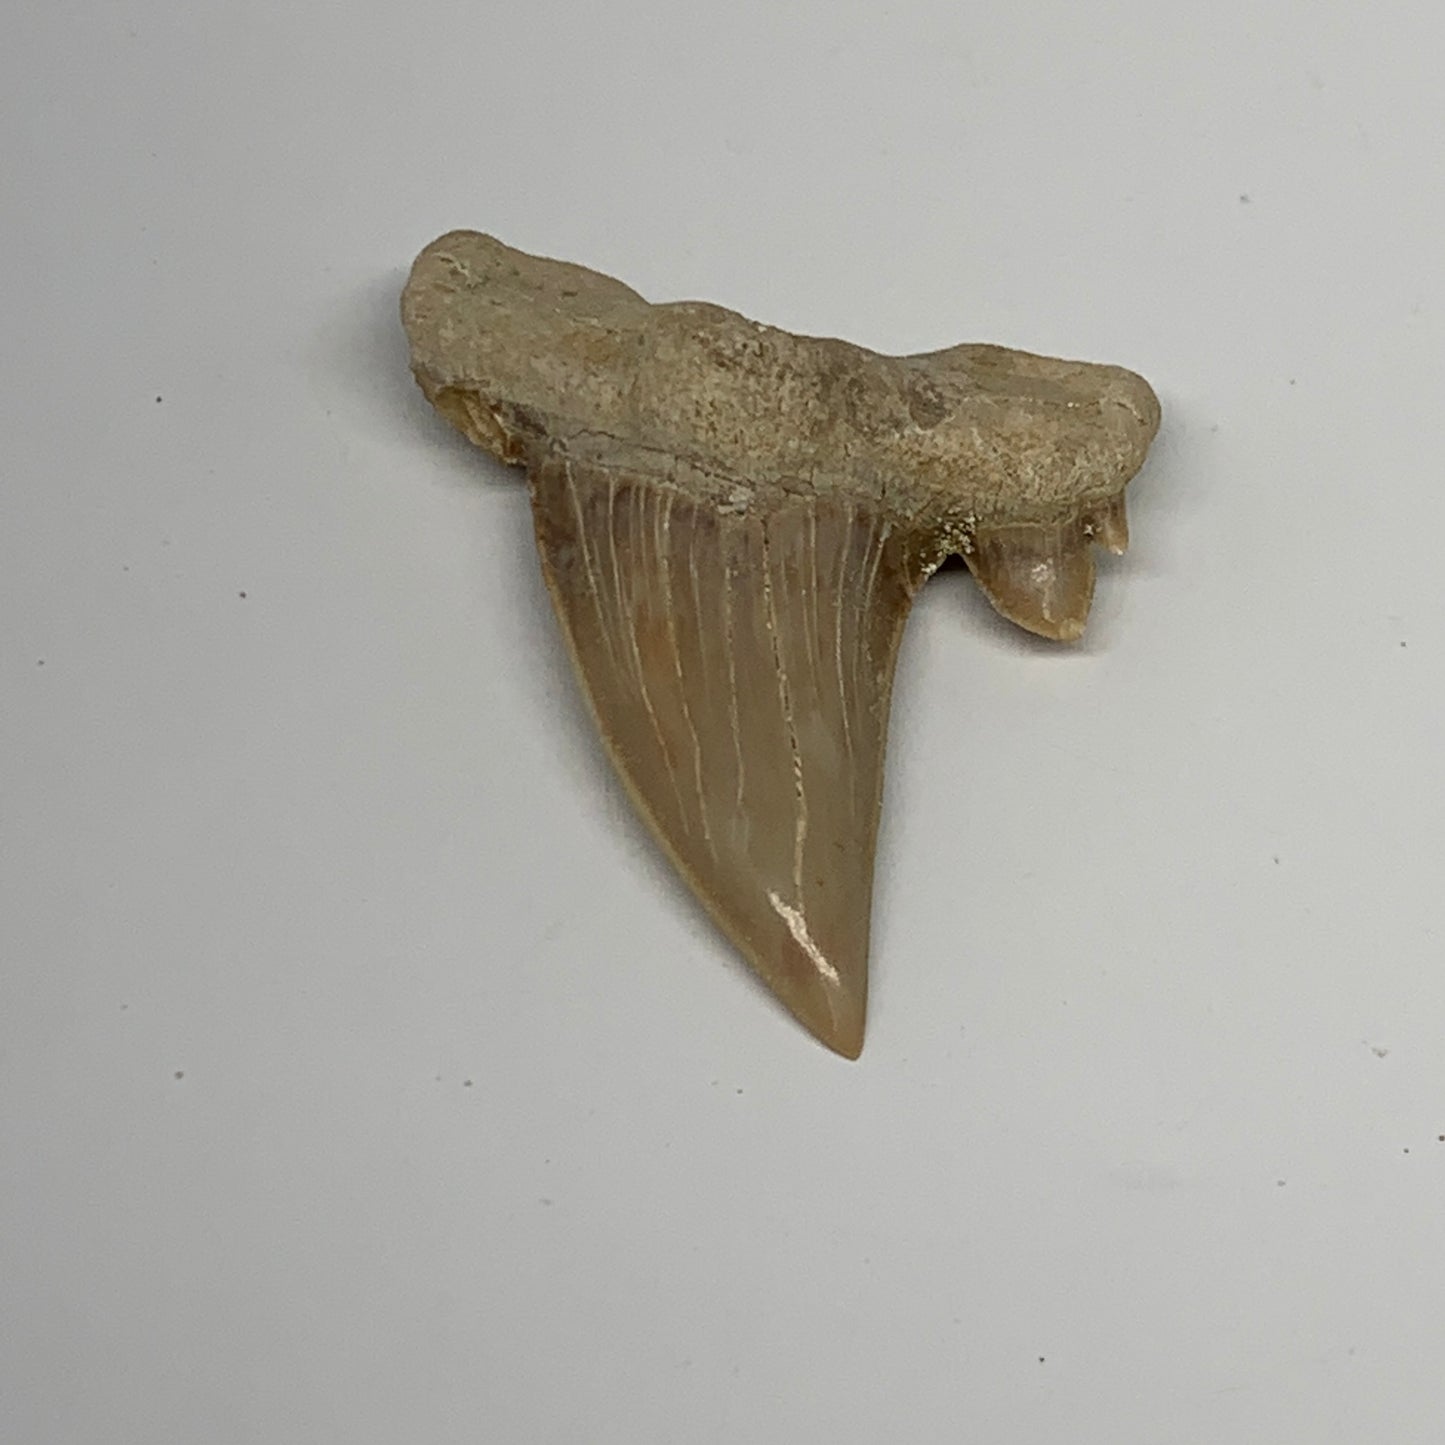 16.6g, 2.1"X 1.7"x 0.5" Natural Fossils Fish Shark Tooth @Morocco, B12695